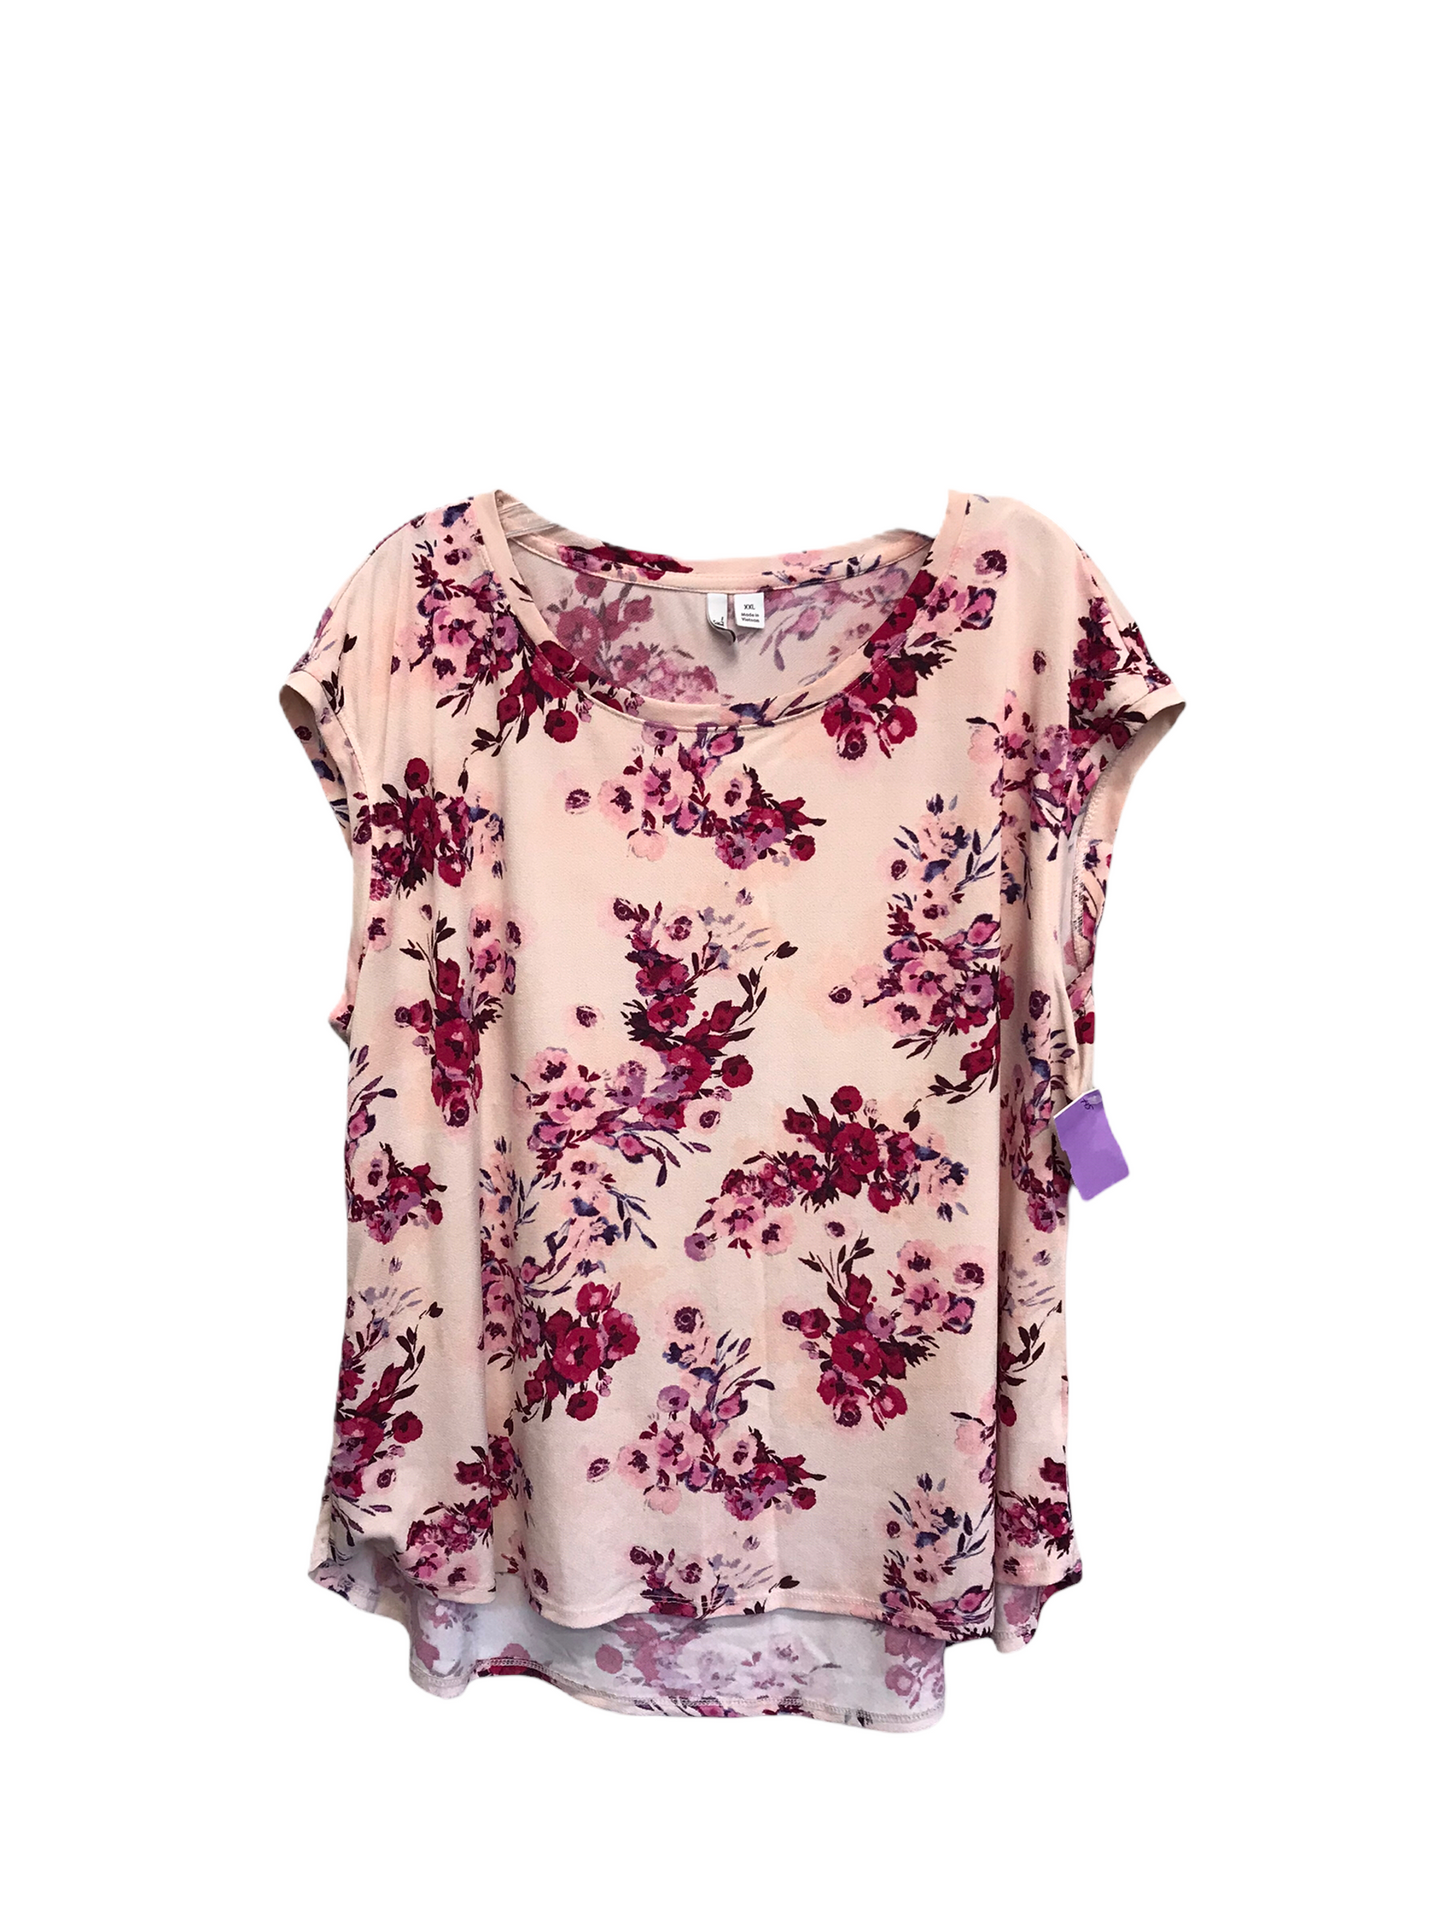 Floral Print Top Sleeveless By Elle, Size: Xxl